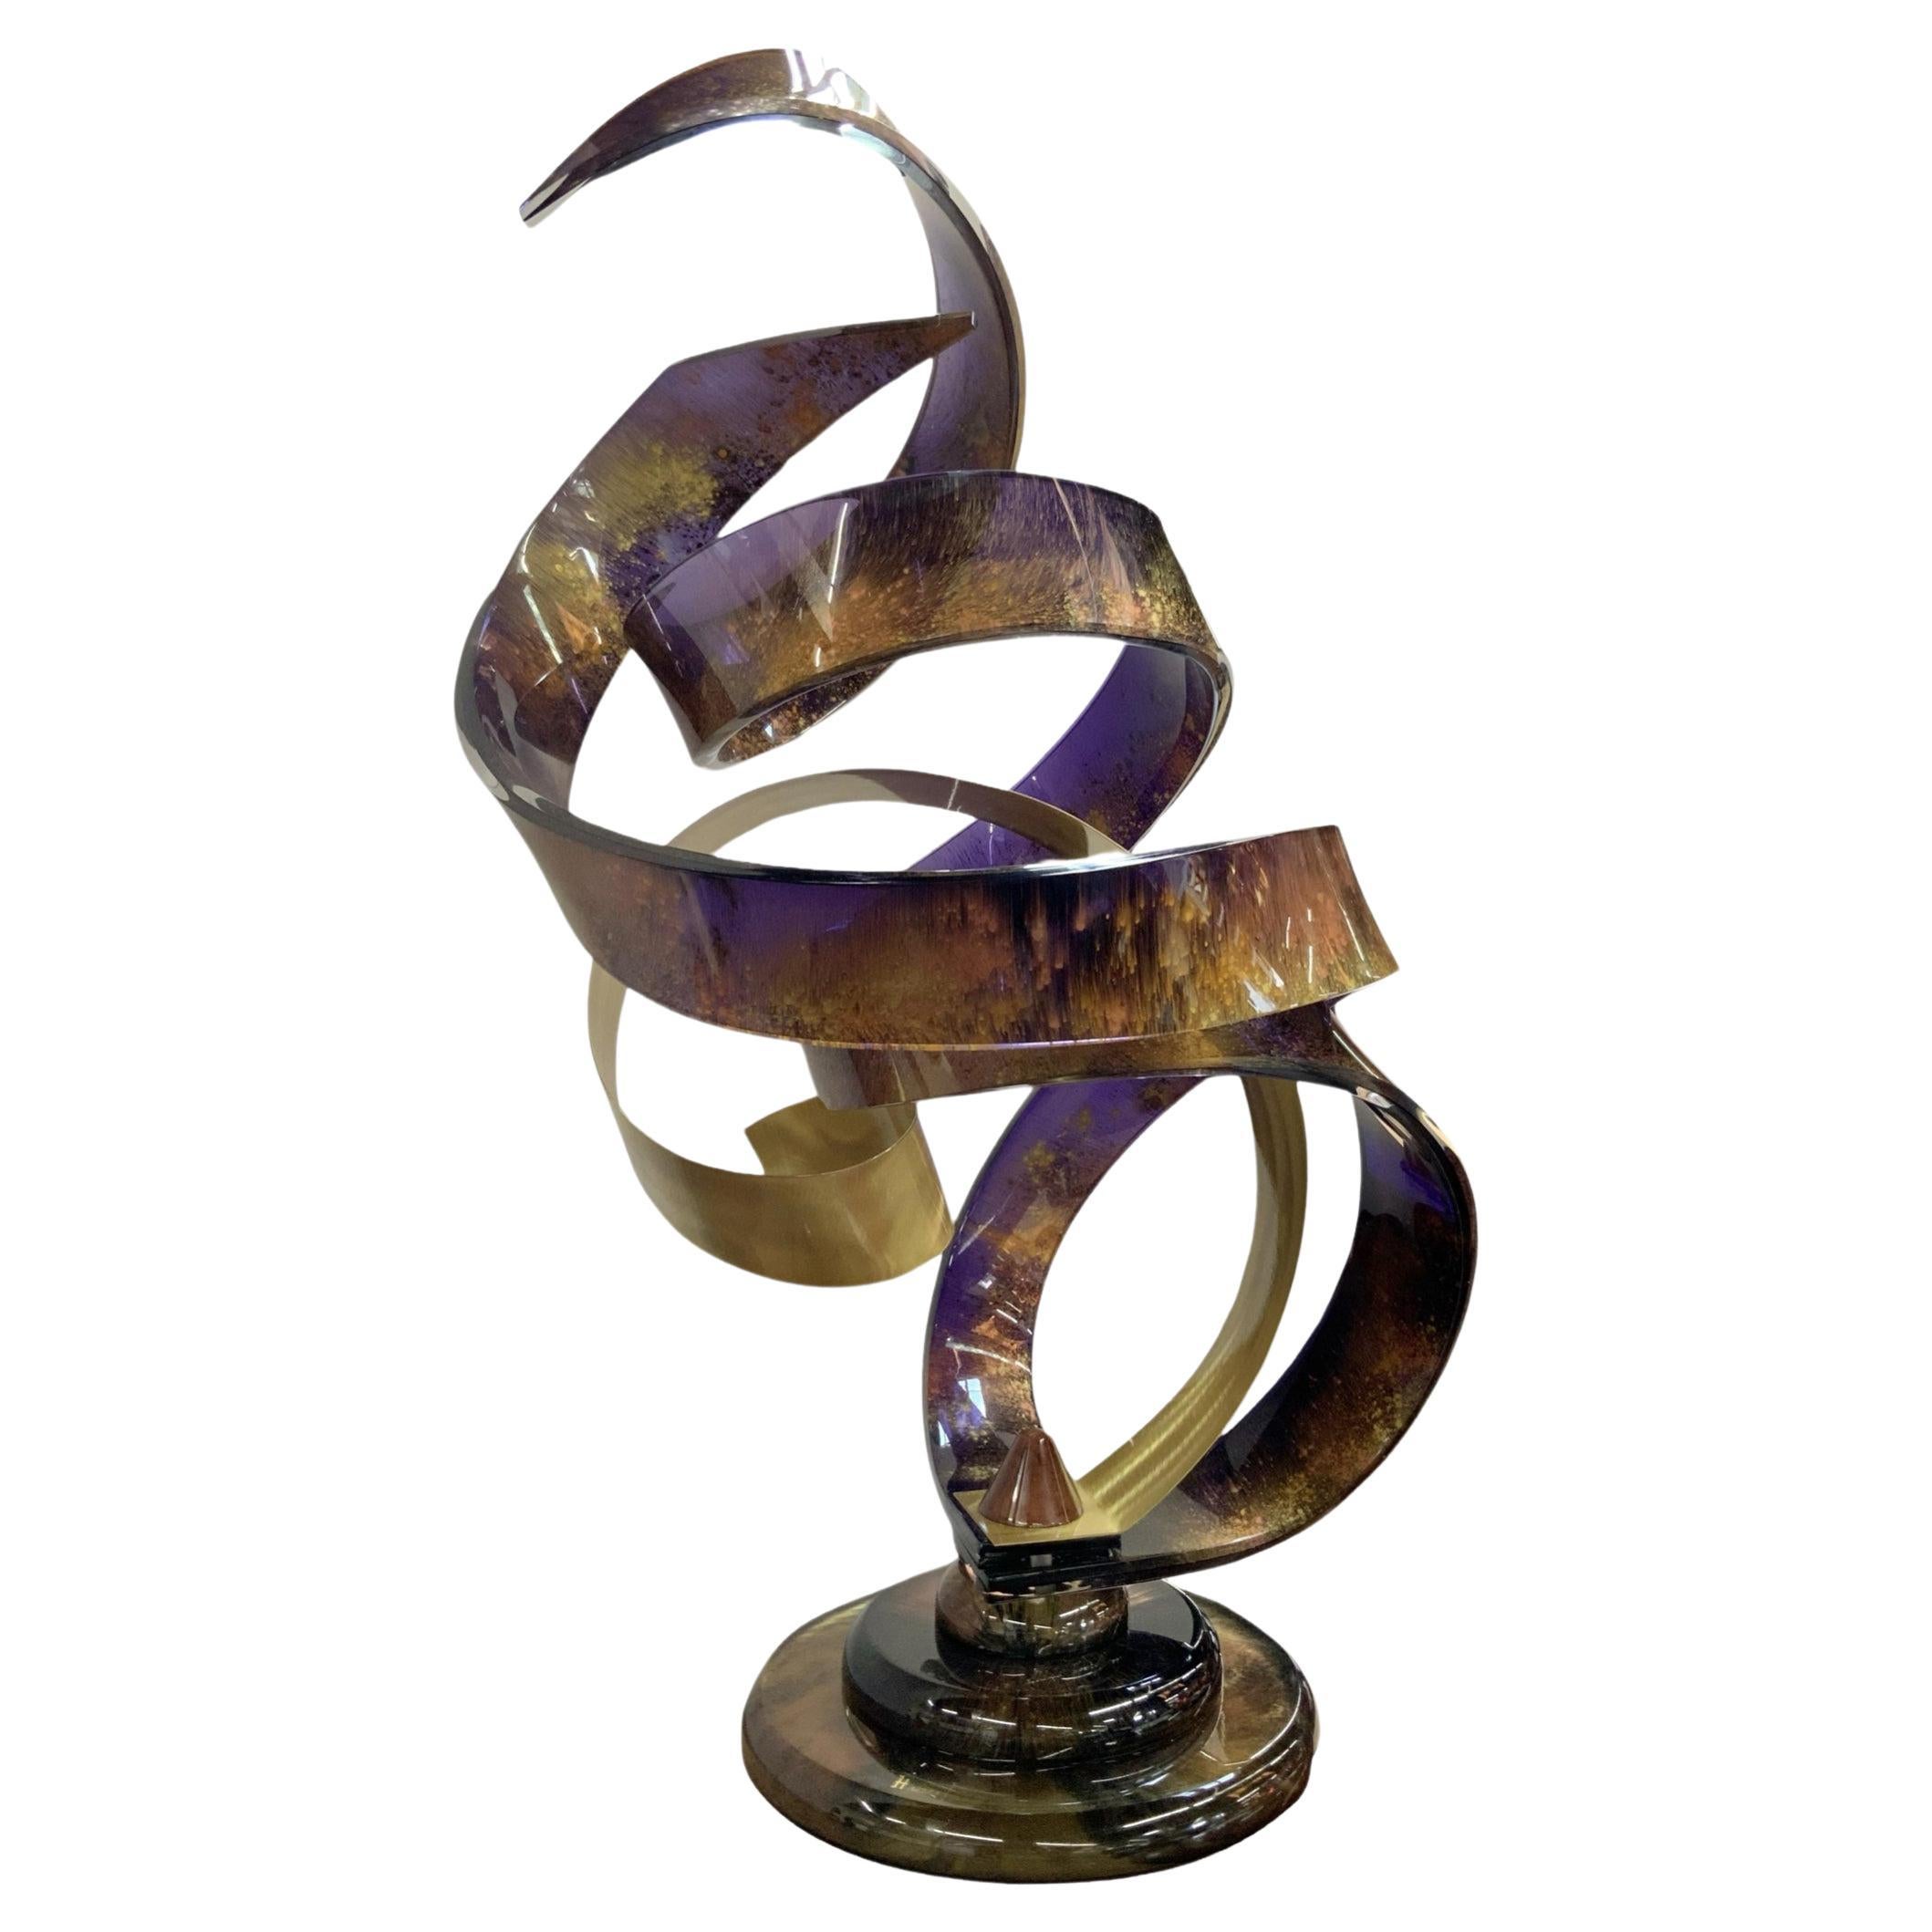 Abstract Lucite and Brass Spiral Sculpture by Shlomi Haziza.